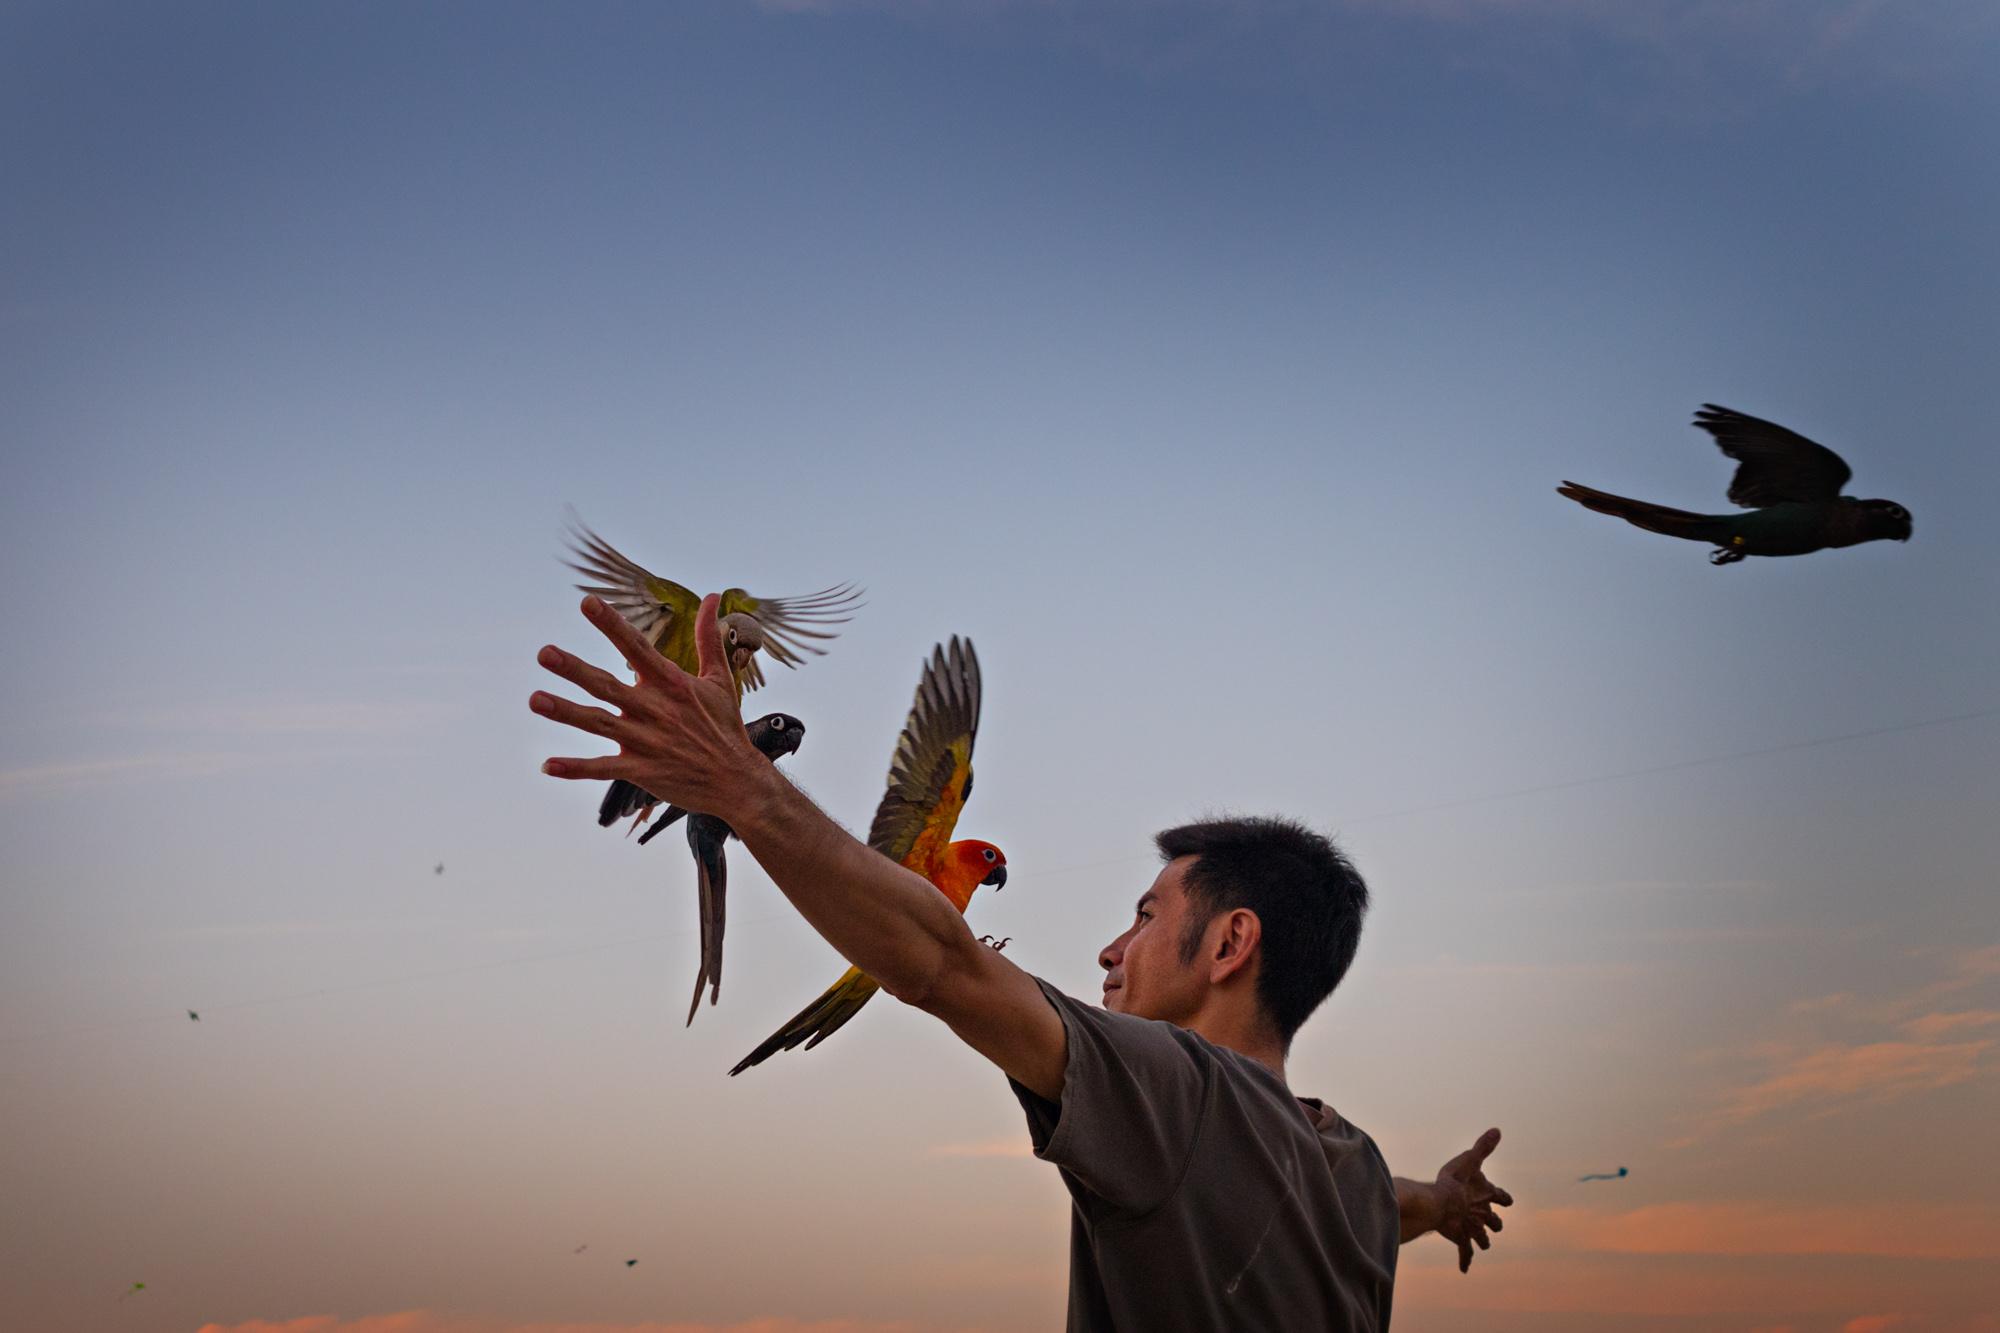 Travel - A man welcomes pet parrots onto his open arms in Sanam...